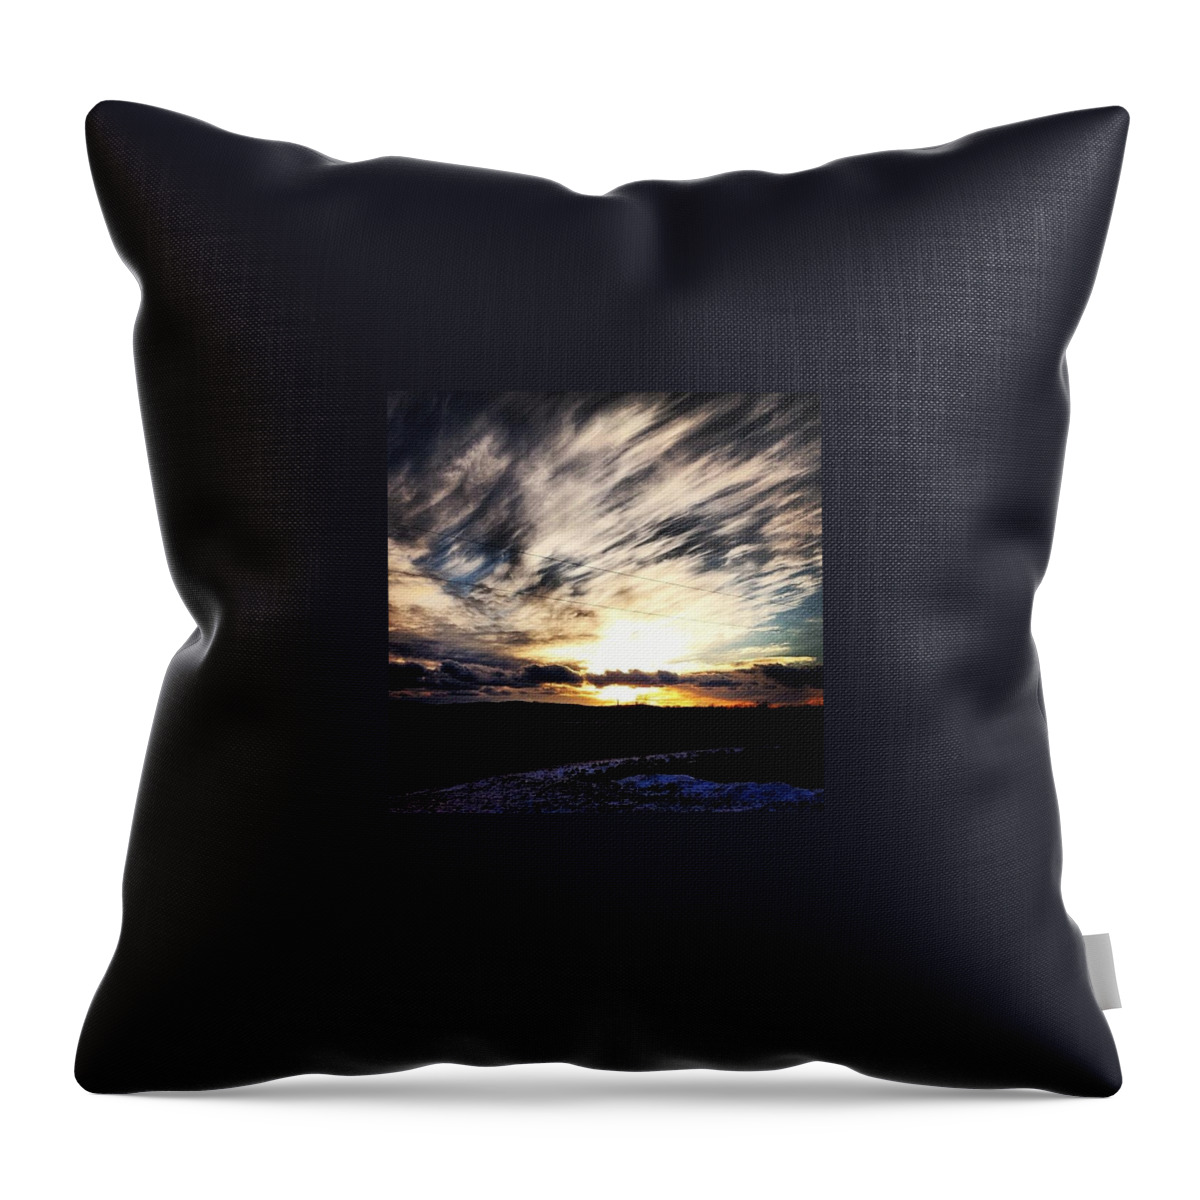 Sunset Throw Pillow featuring the photograph Sunset by Jenna Lindquist